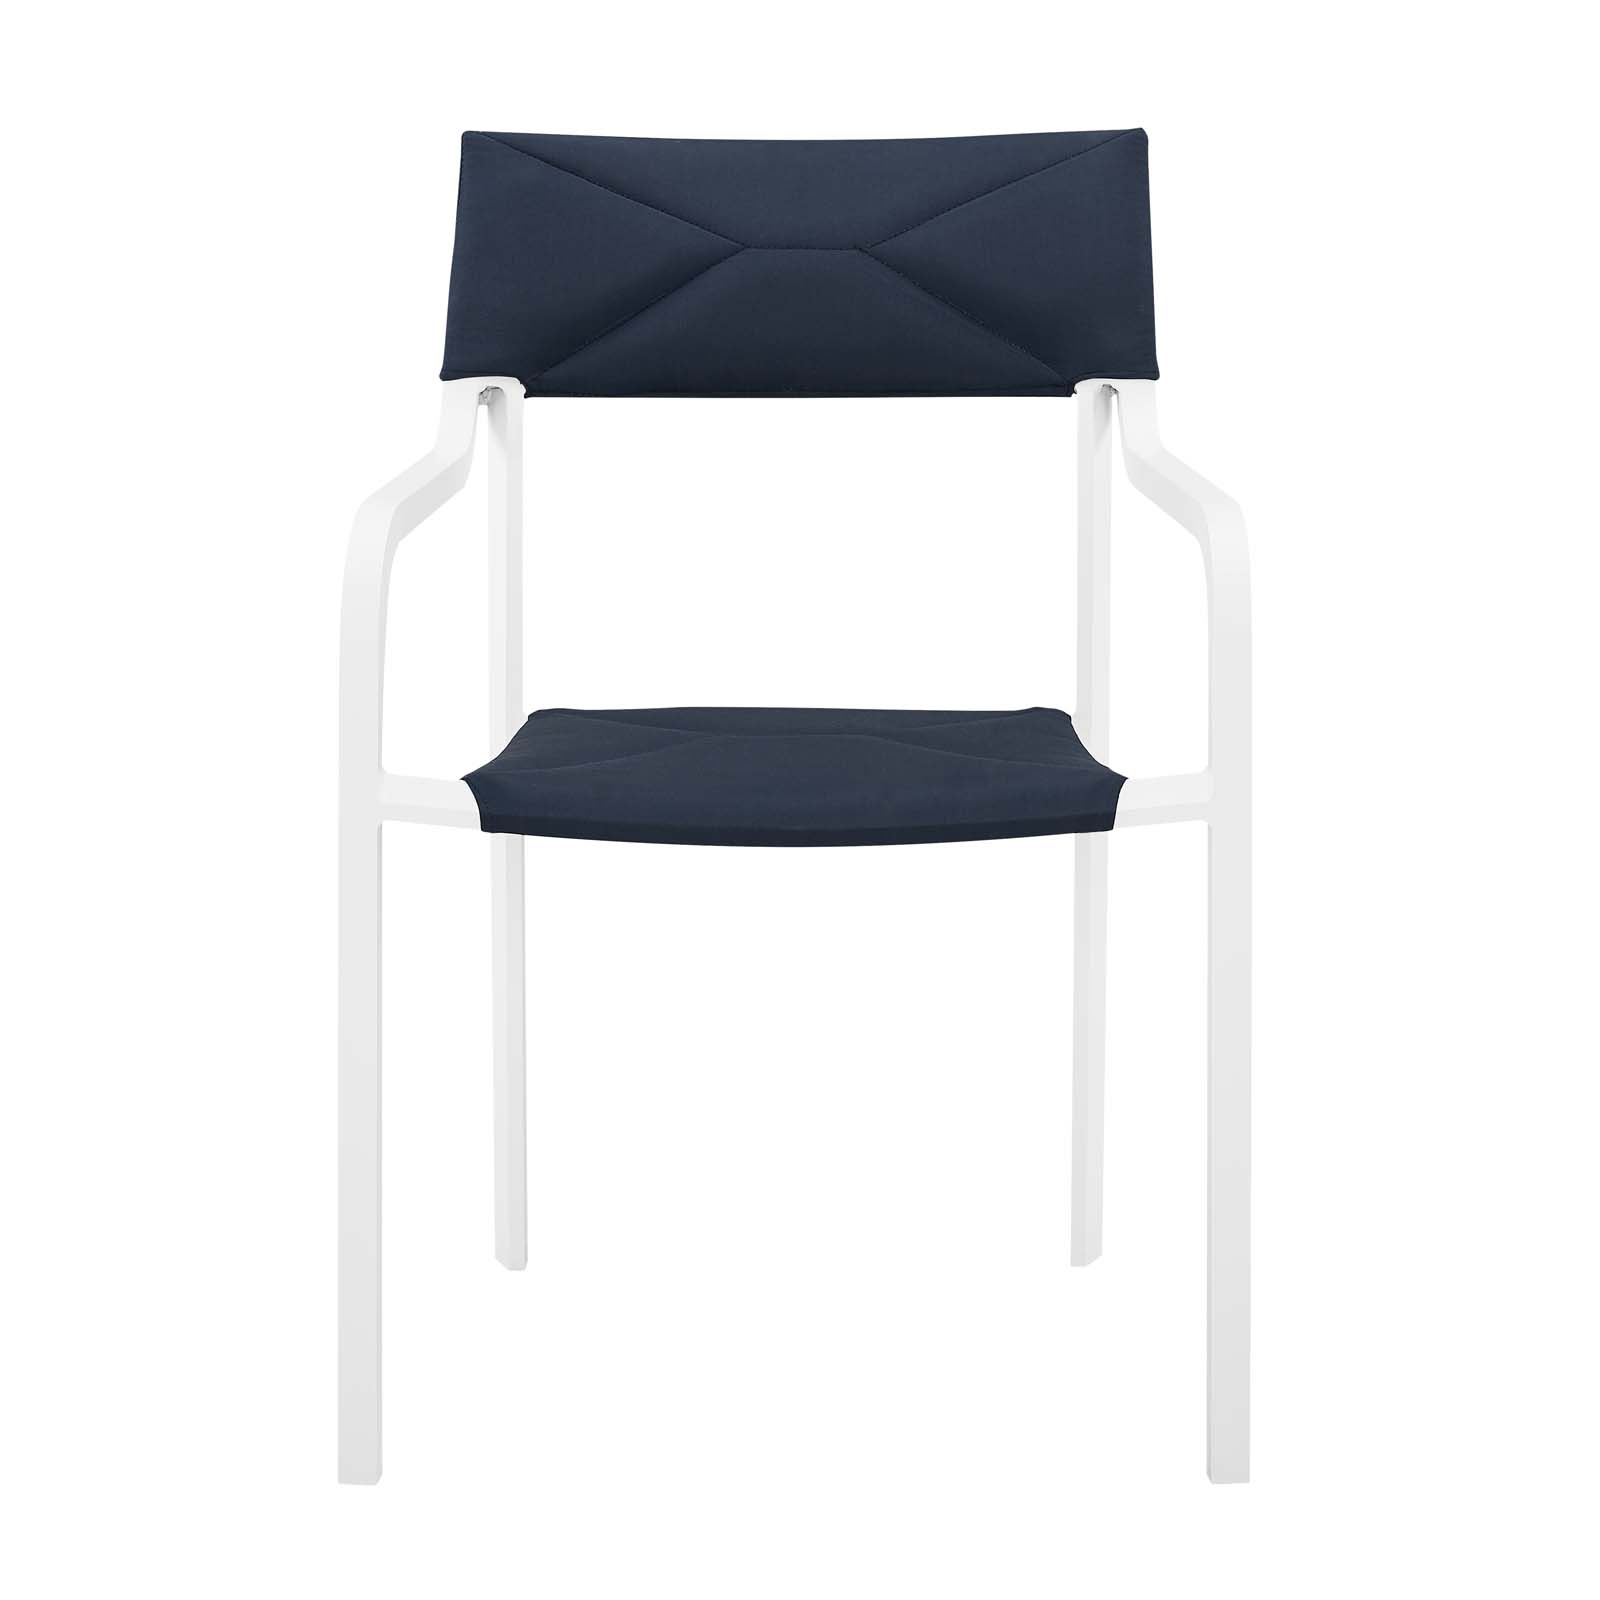 Contemporary Modern Urban Designer Outdoor Patio Balcony Garden Furniture Side Dining Armchair Chair, Fabric Aluminum, Navy Blue White - image 5 of 6